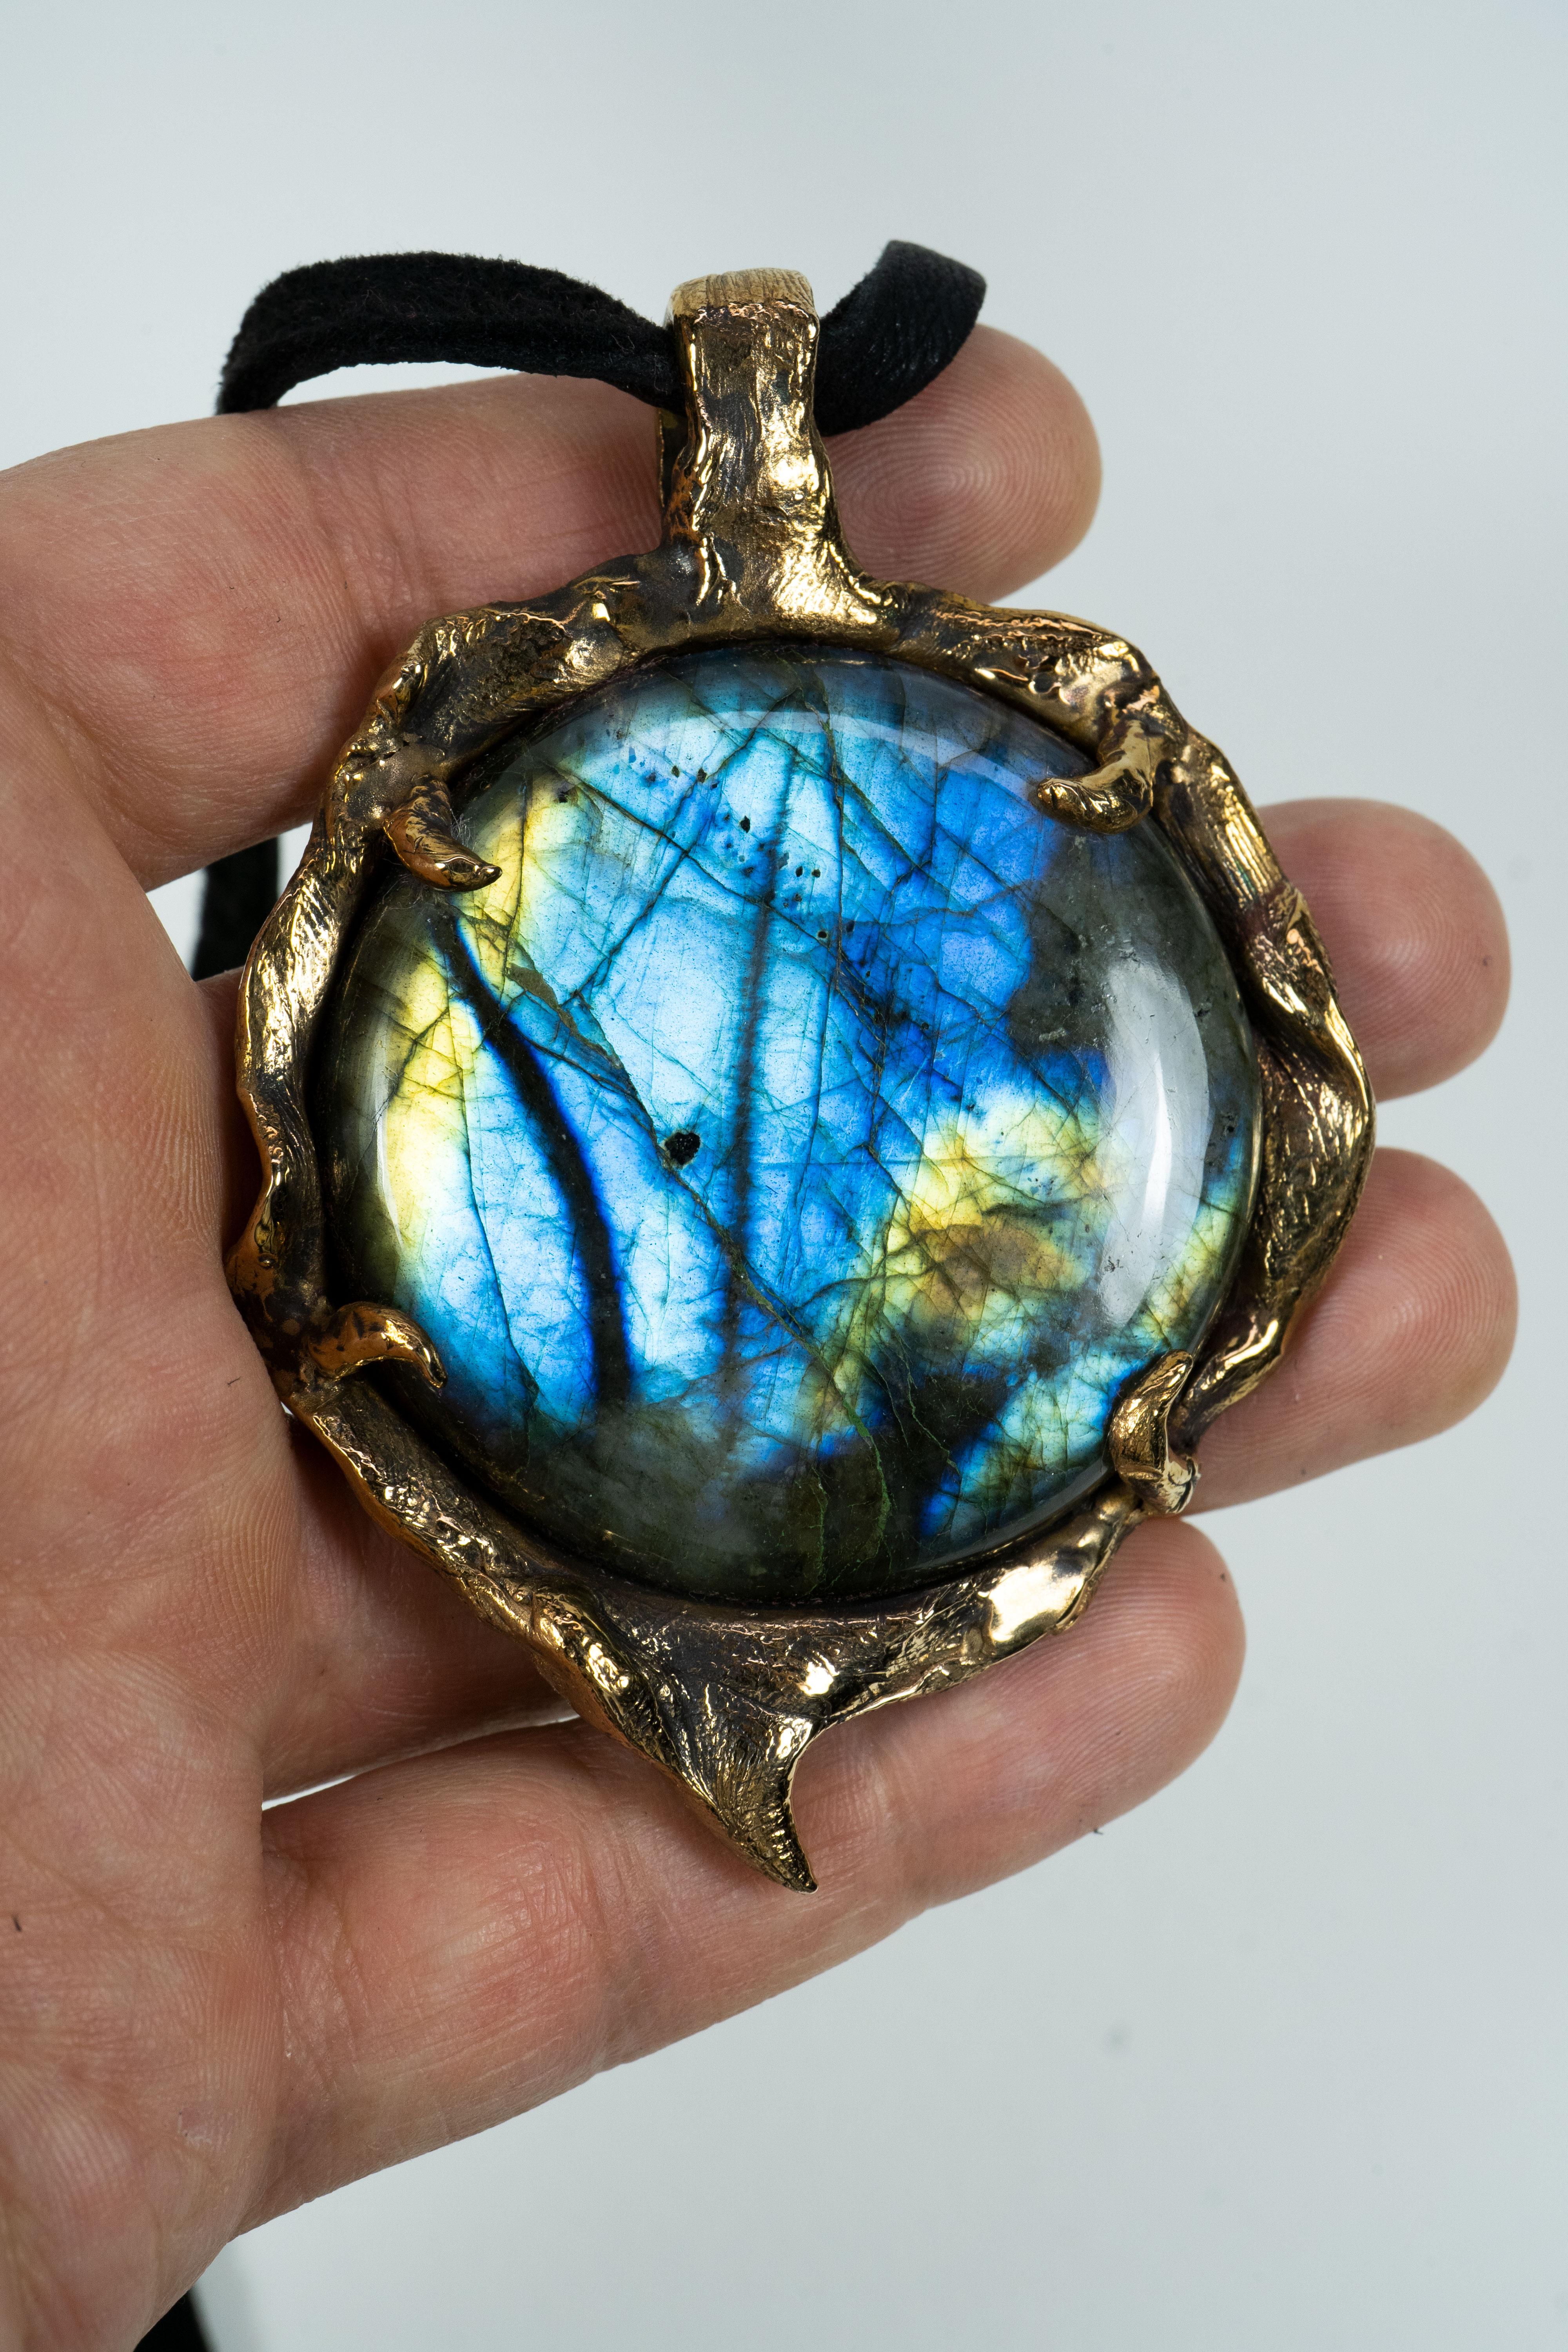 This pendant is a one-of-a-kind piece by Ken Fury that is hand-carved and cast in bronze. This is a large statement piece!

Stones: Labradorite 

Pendant size: 55mm x 80mm. 

Hand-signed

Pendant only, chain not included. 